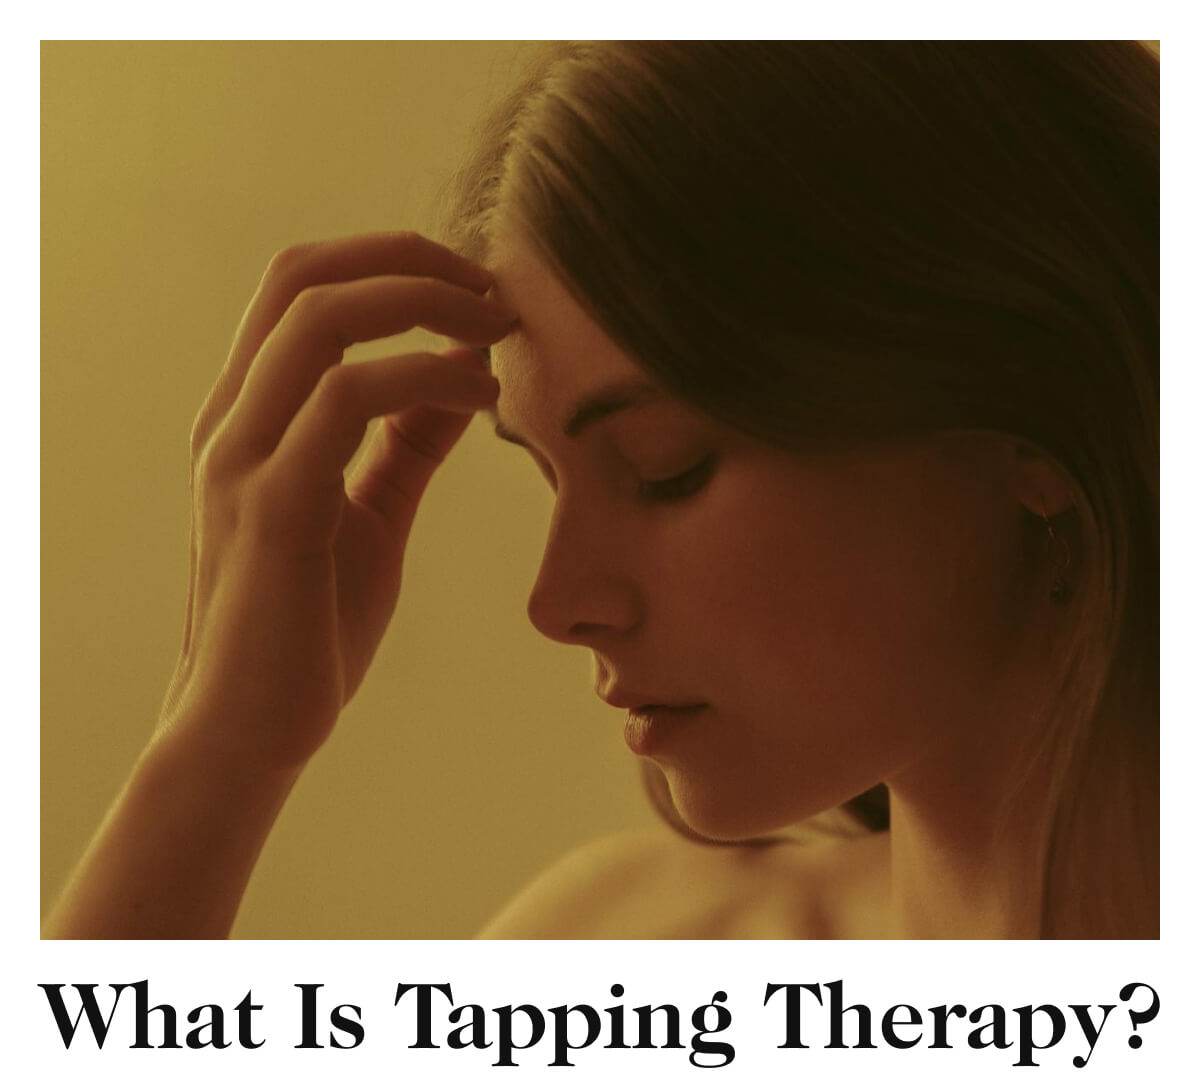 What Is Tapping Therapy?